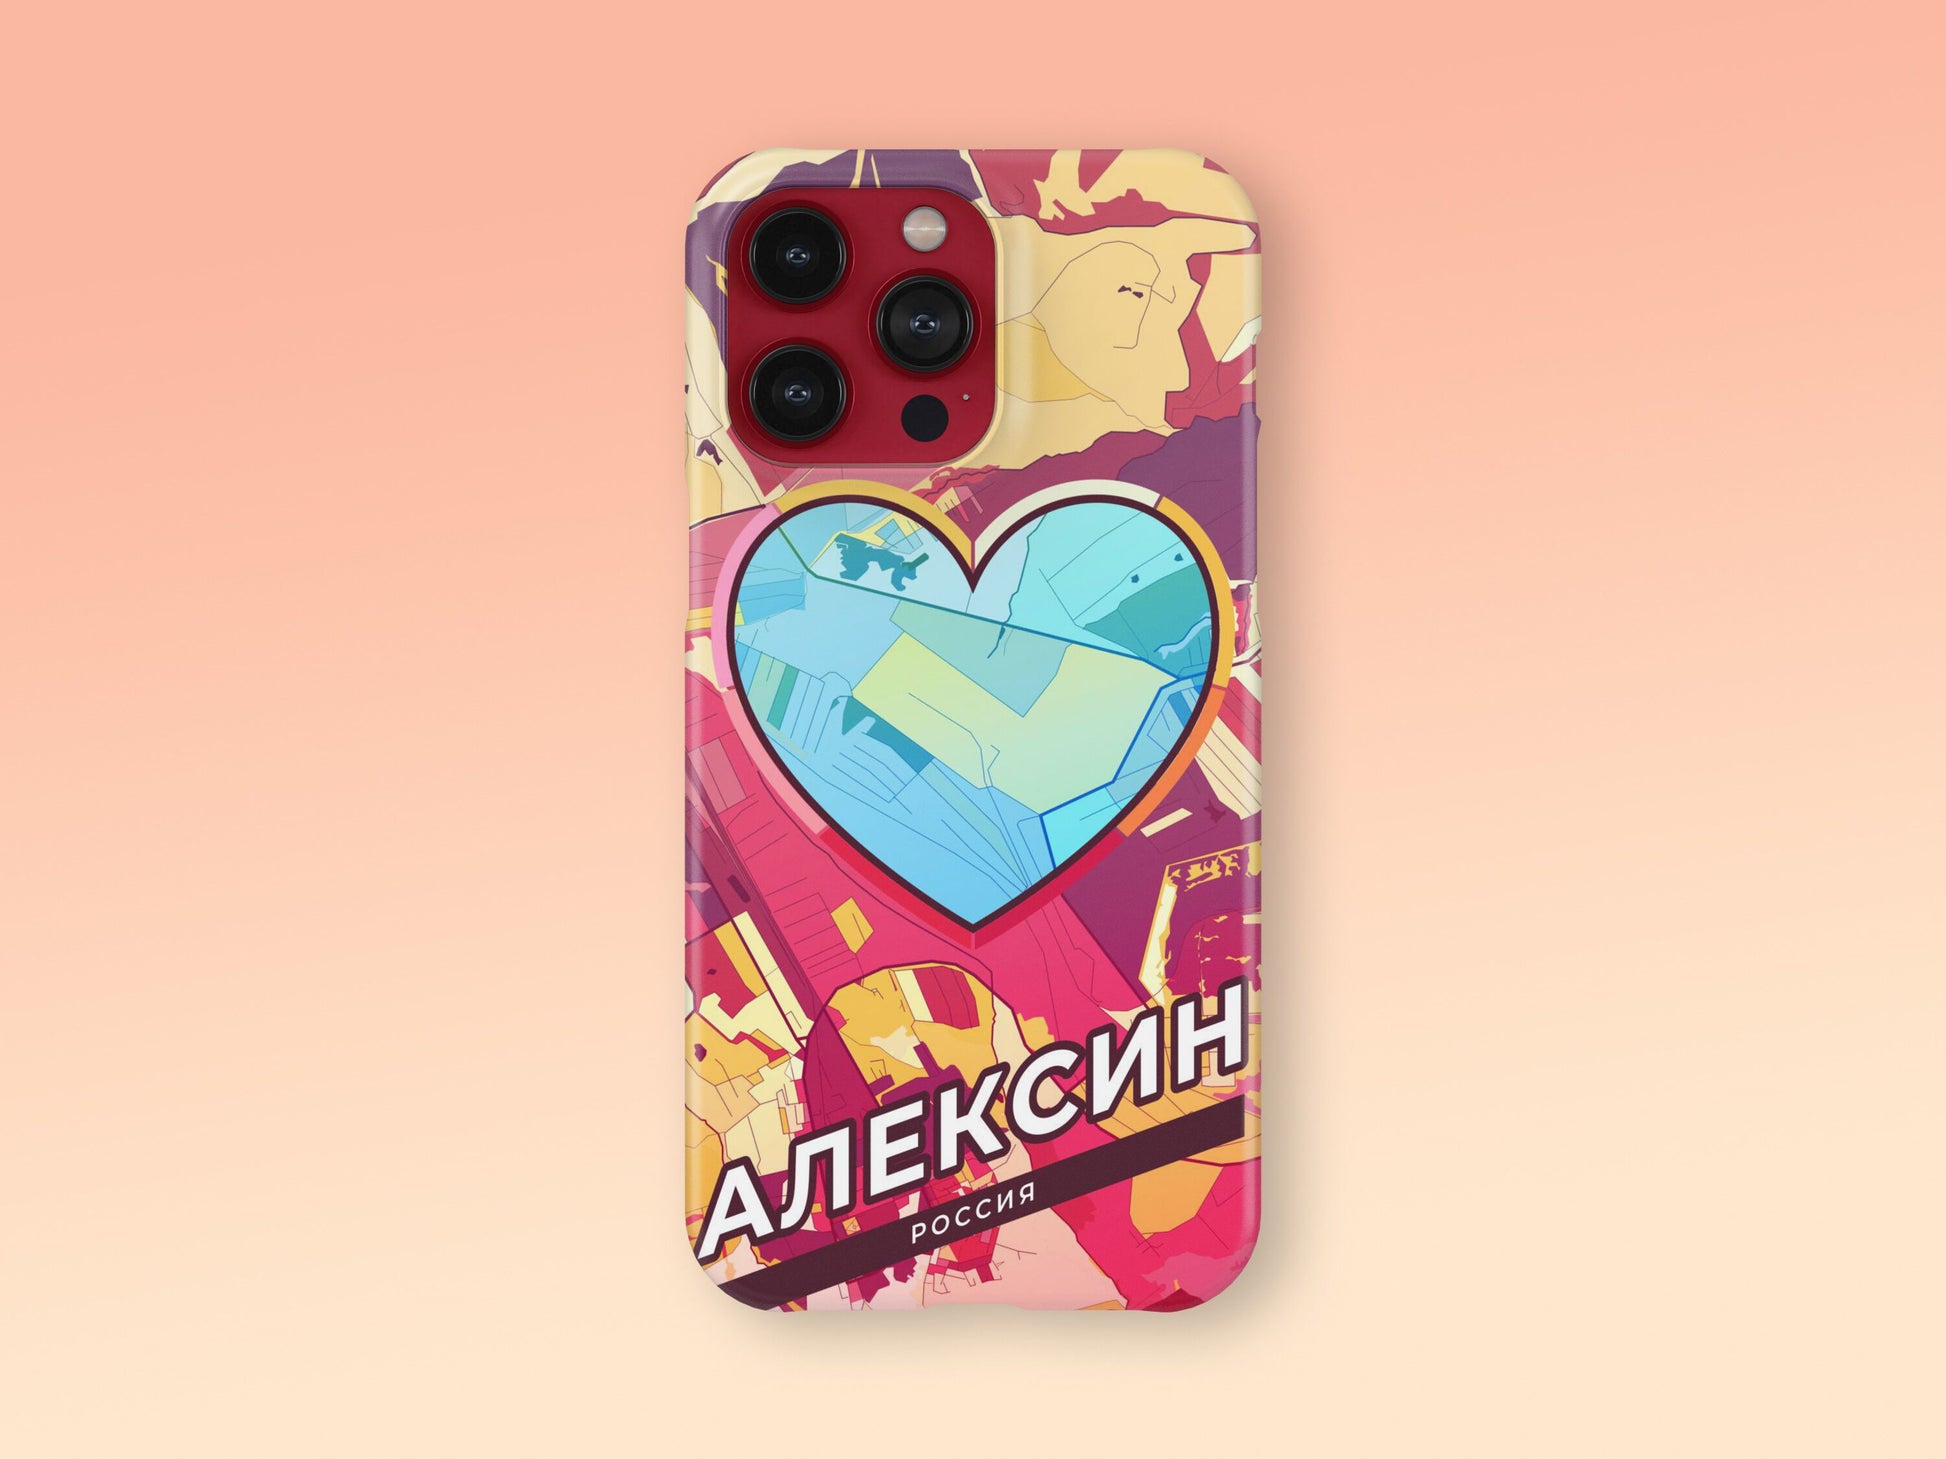 Aleksin Russia slim phone case with colorful icon. Birthday, wedding or housewarming gift. Couple match cases. 2